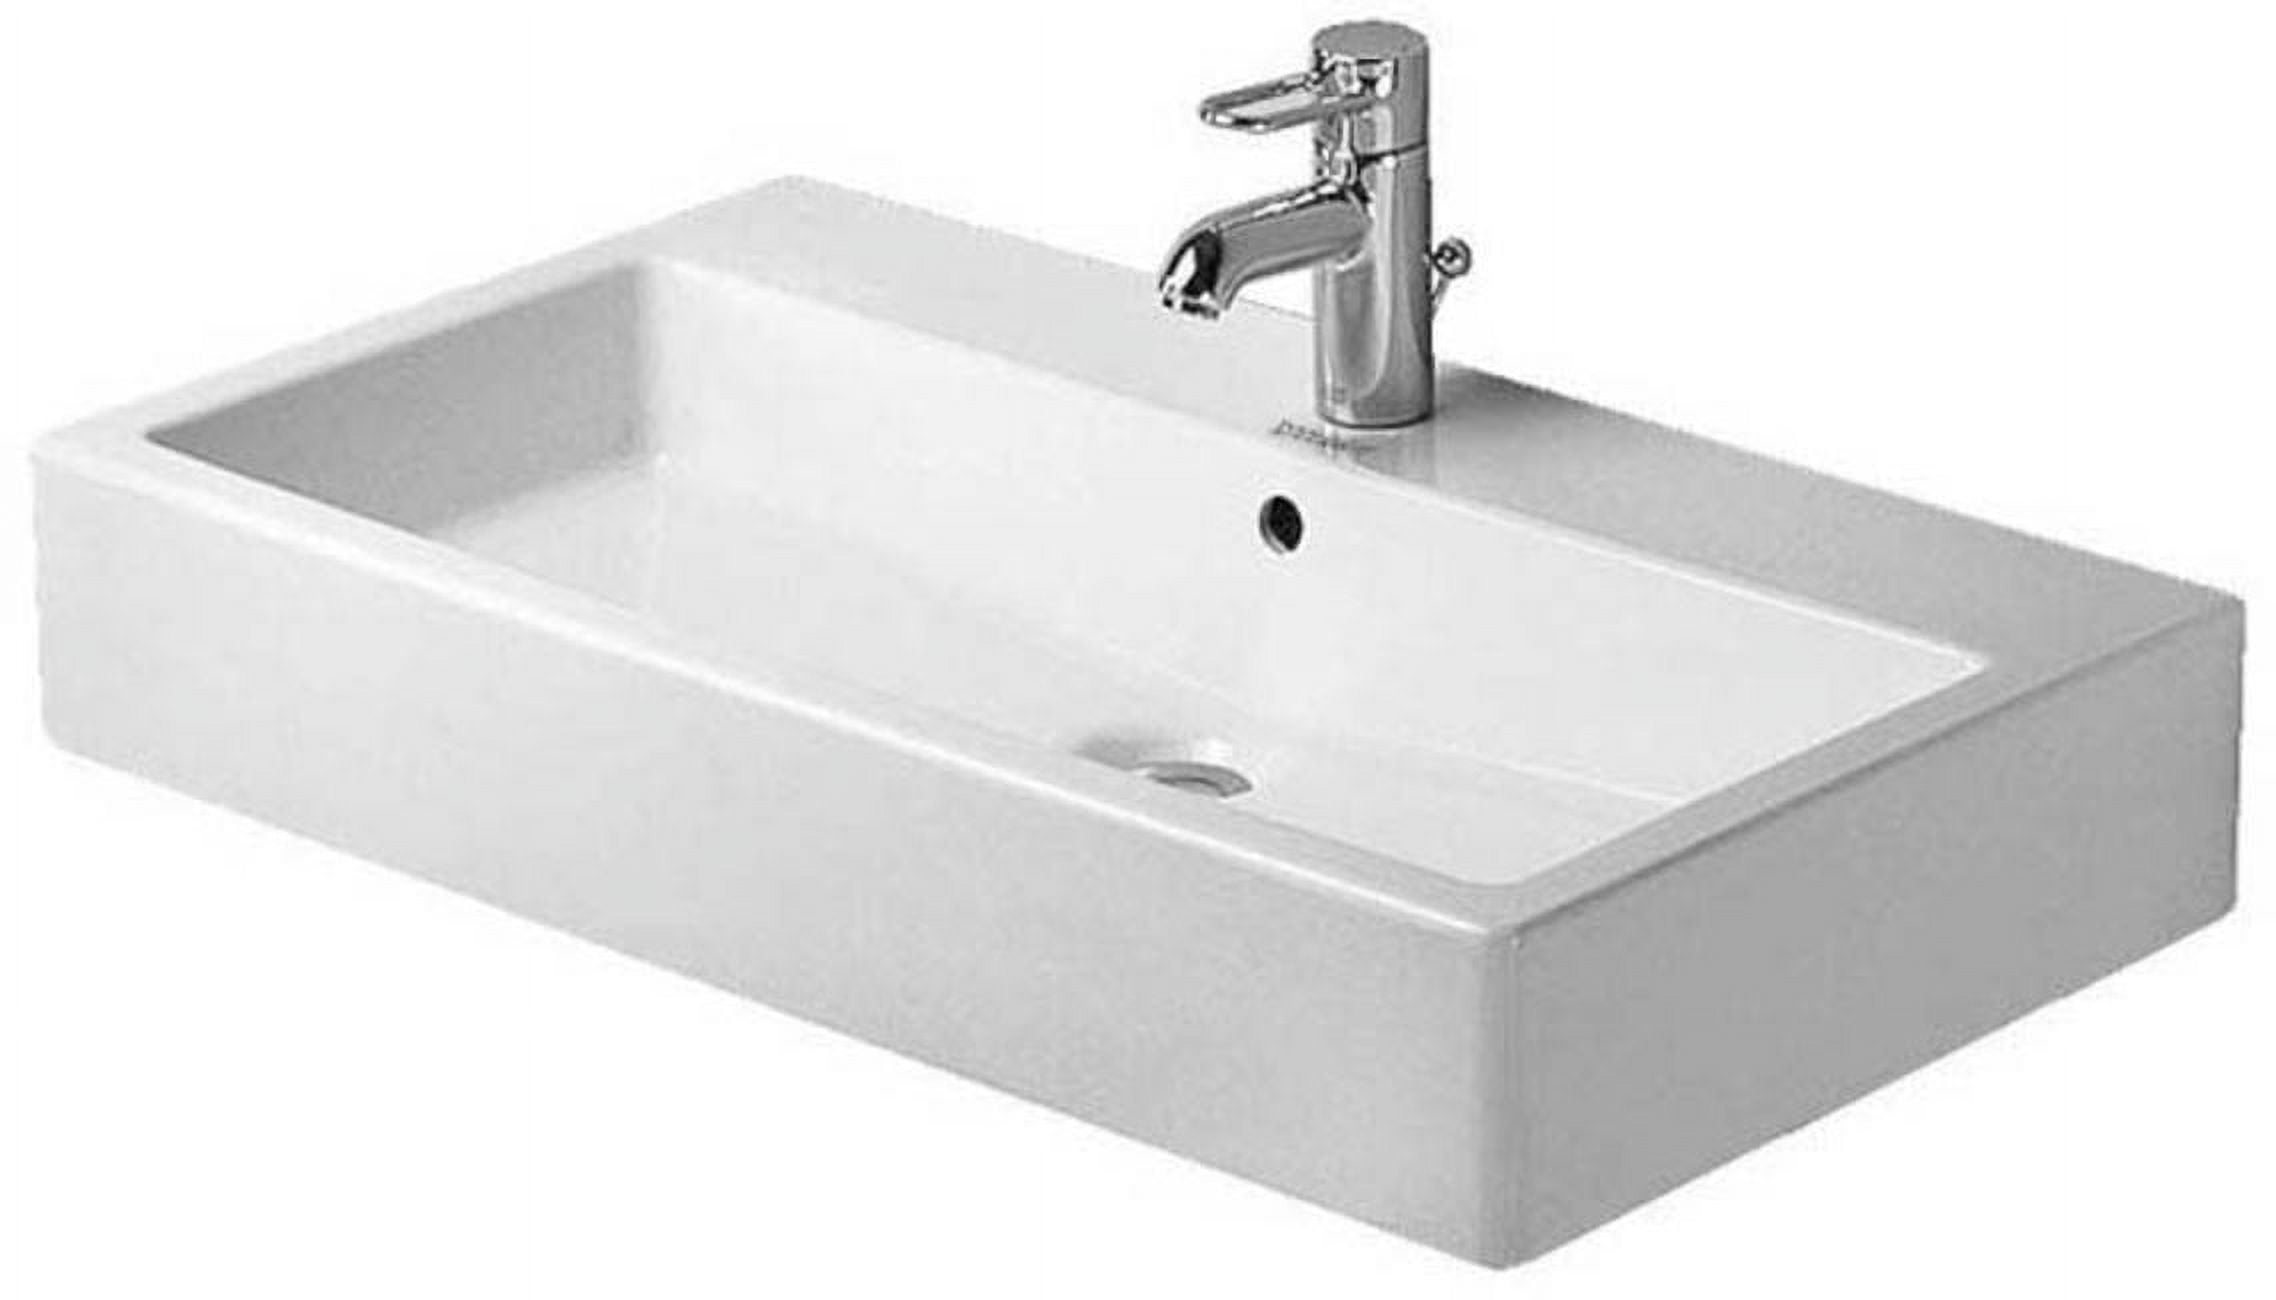 454800000 Vero Wall Mount Bathroom Sink With Overflow And 1 Tap Platform